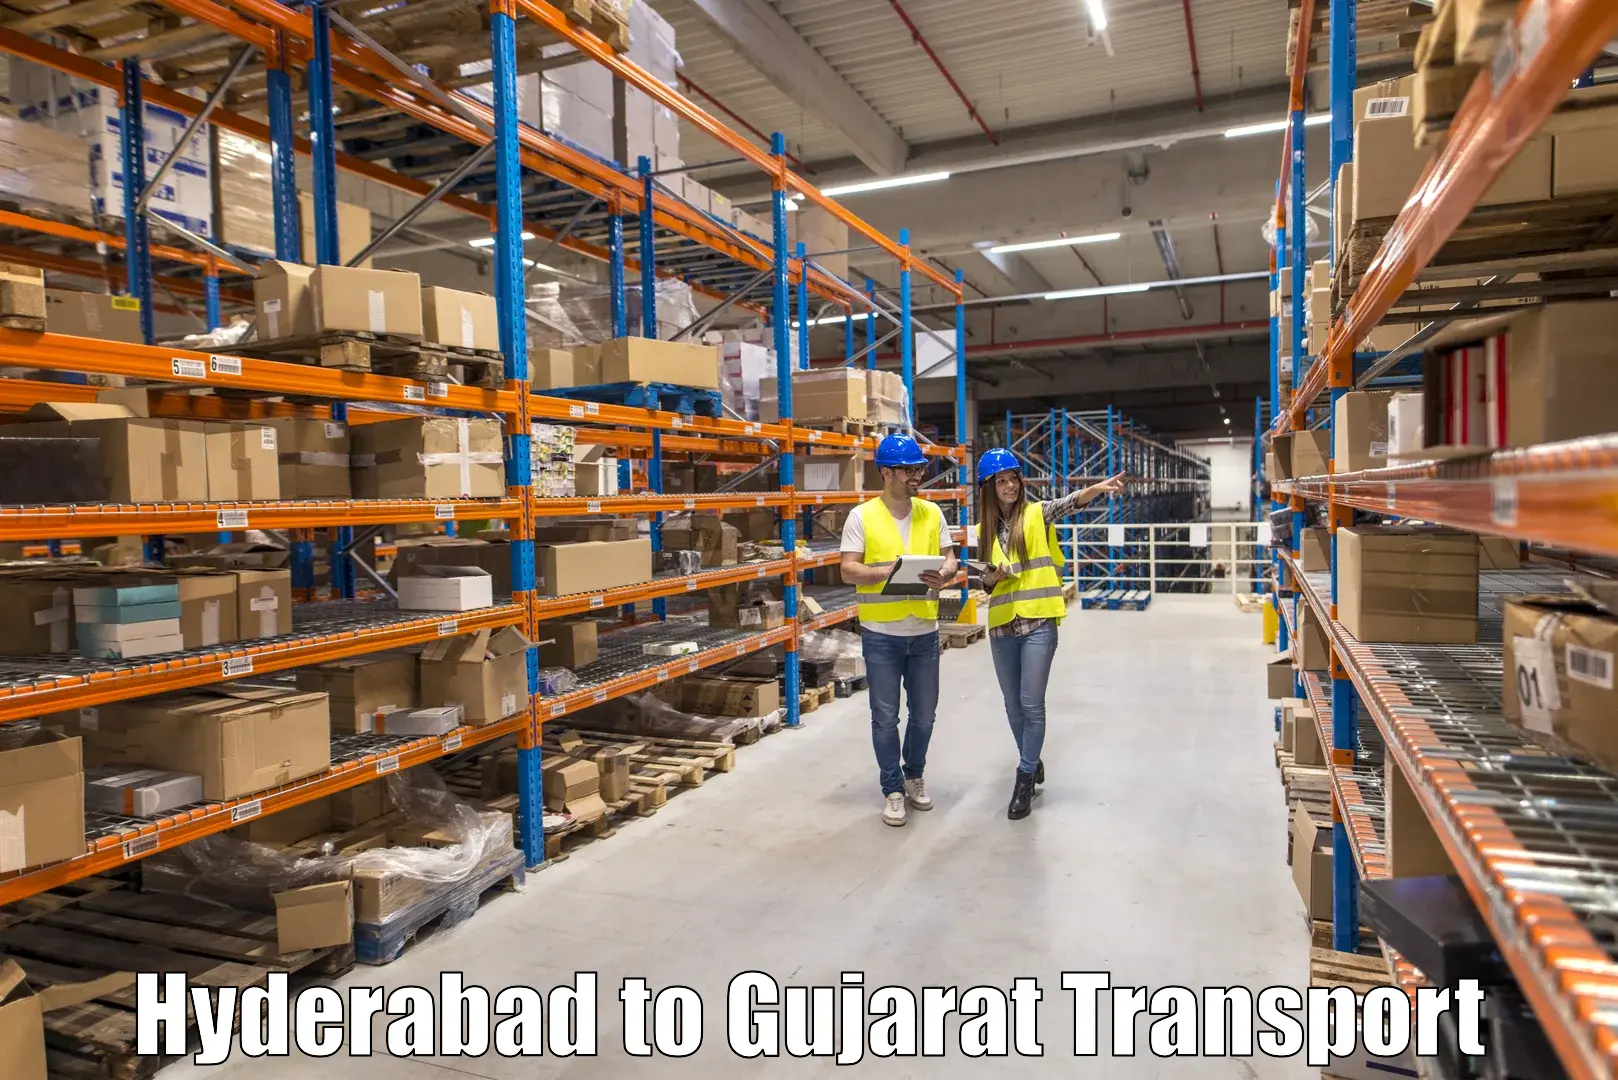 Nearby transport service Hyderabad to Godhra